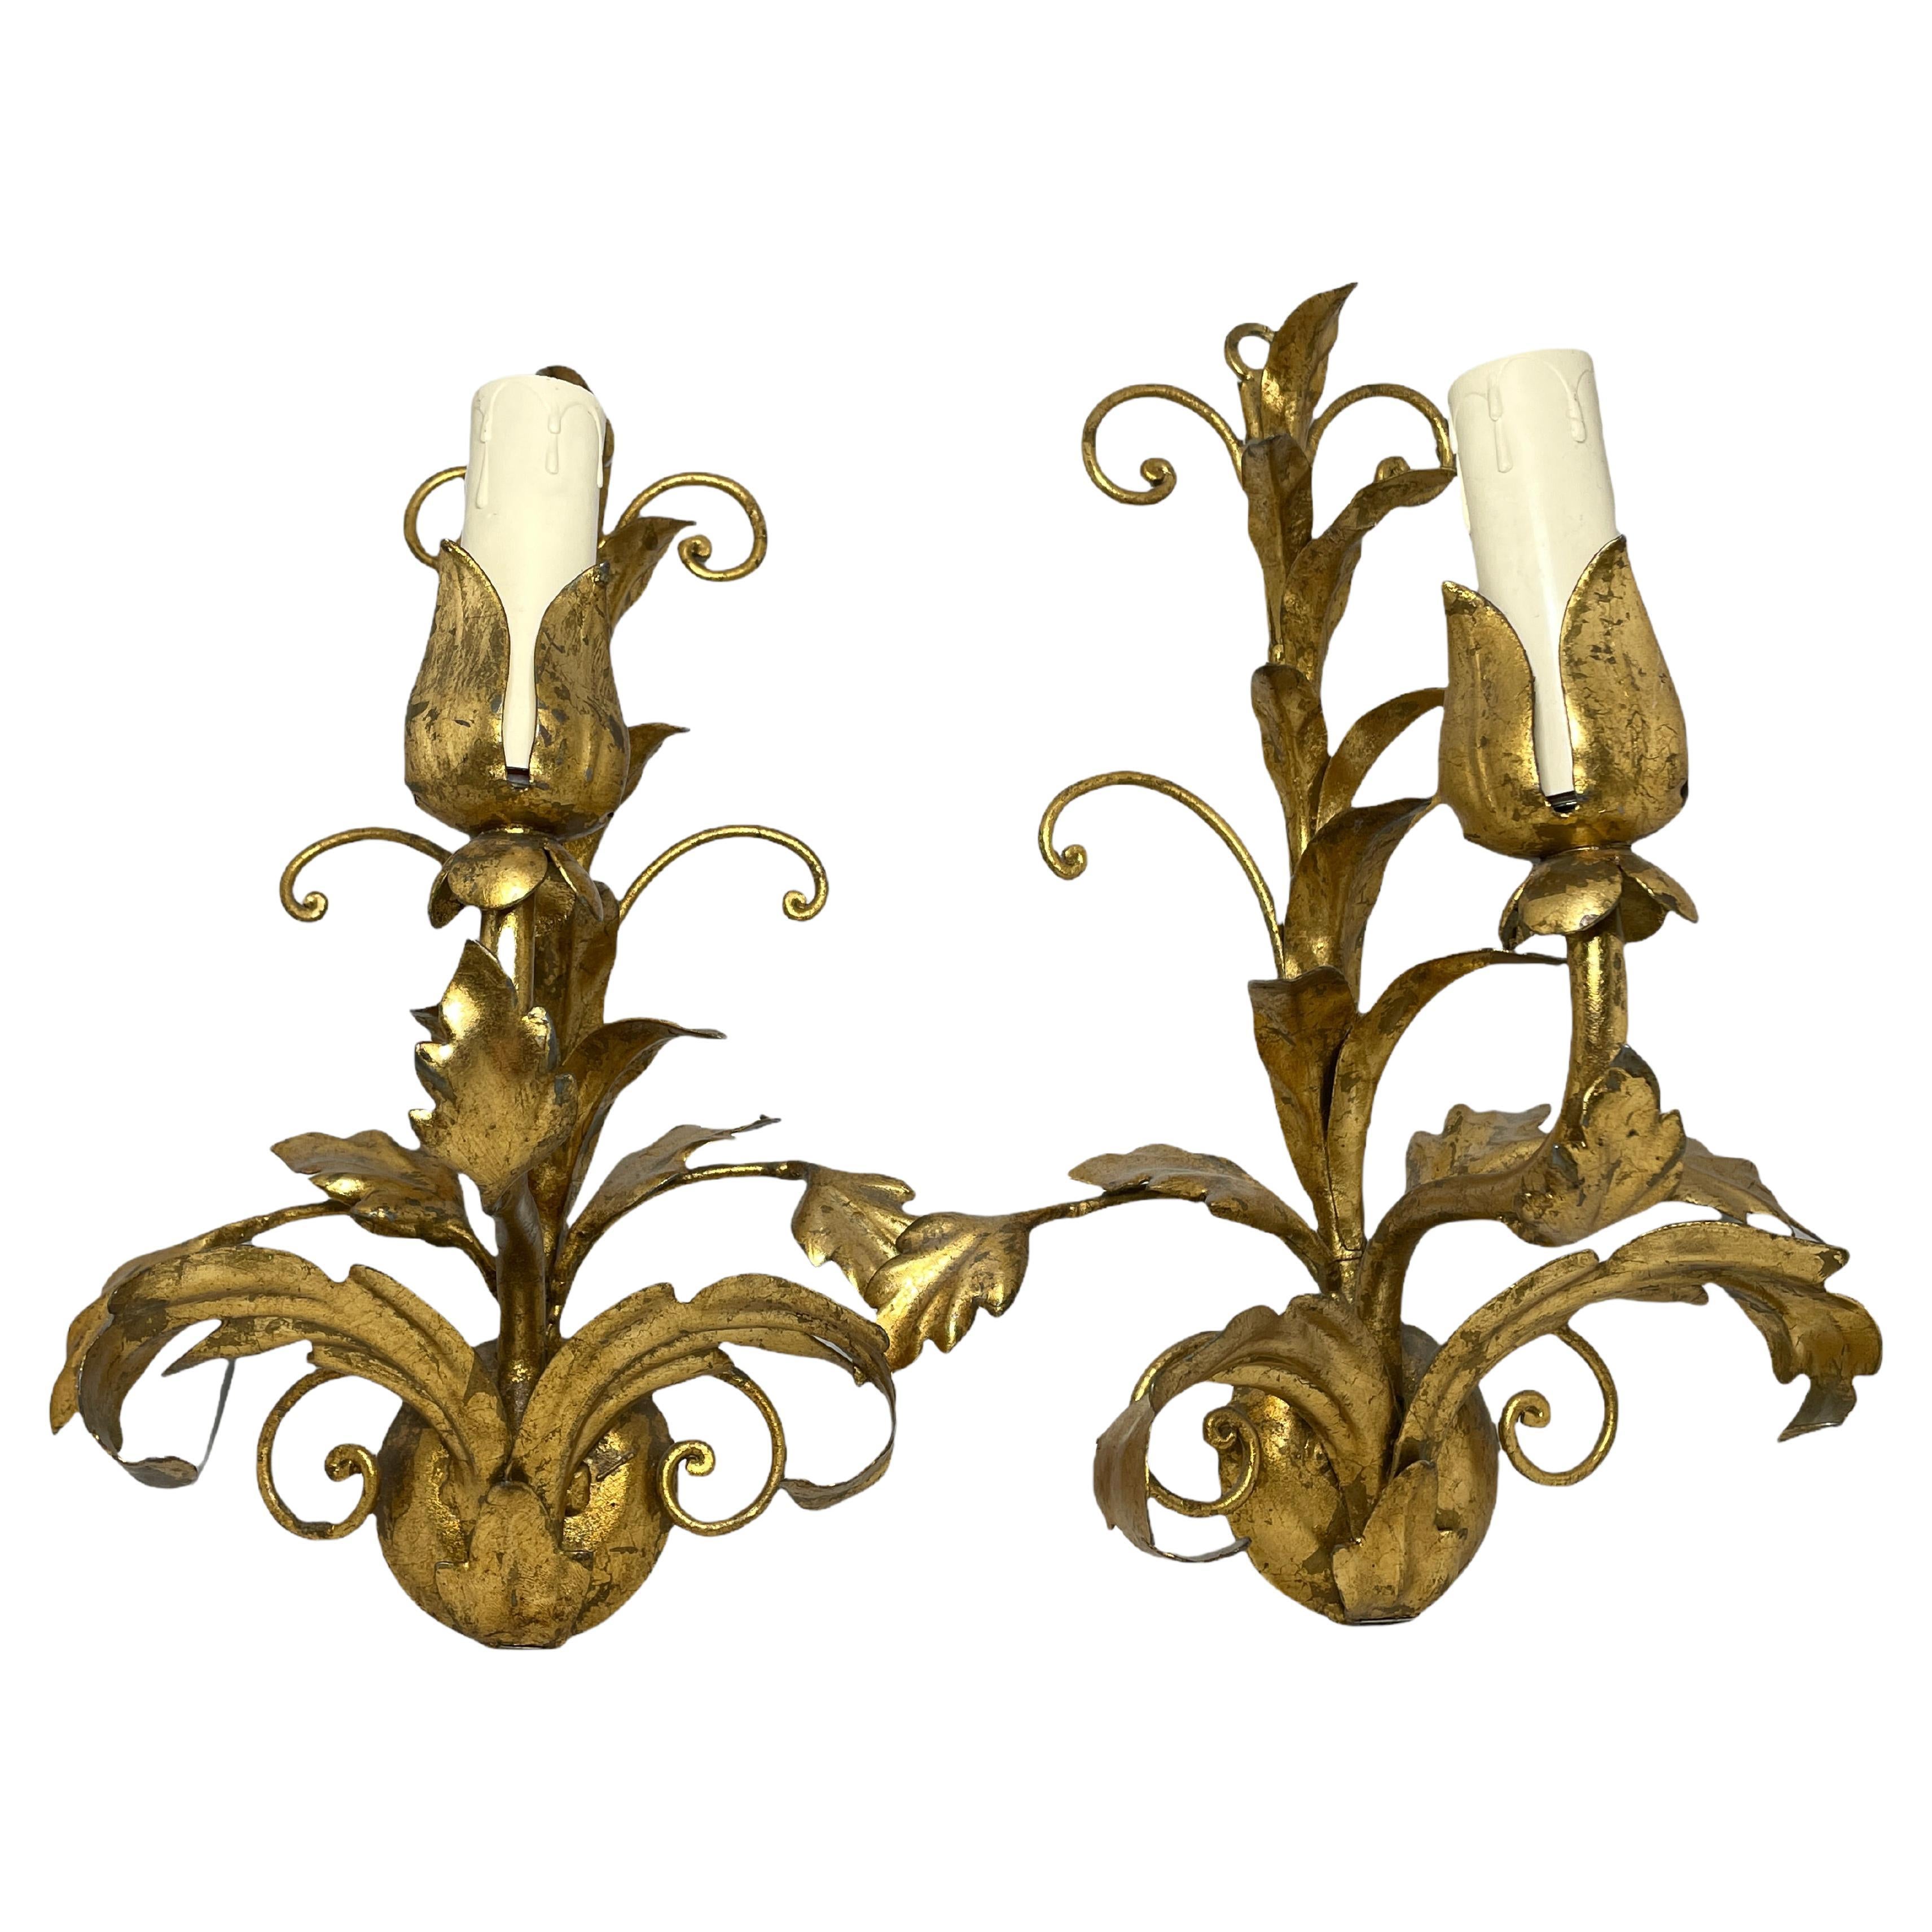 Pair of Tole Sconces Gilded Metal, Italy, 1960s